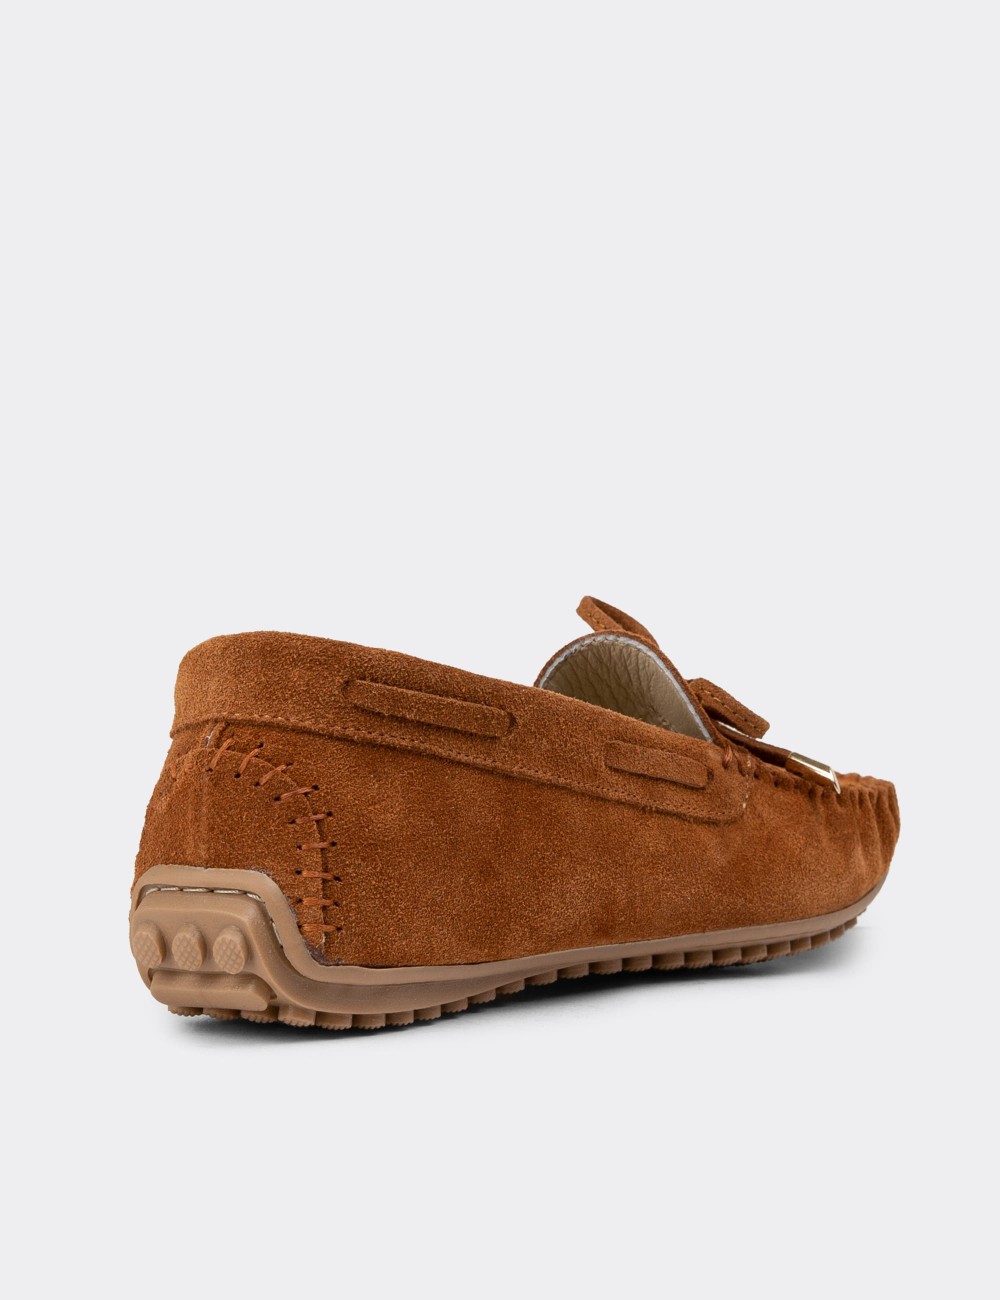 Tan Suede Leather Loafers - SW101ZTBAC03